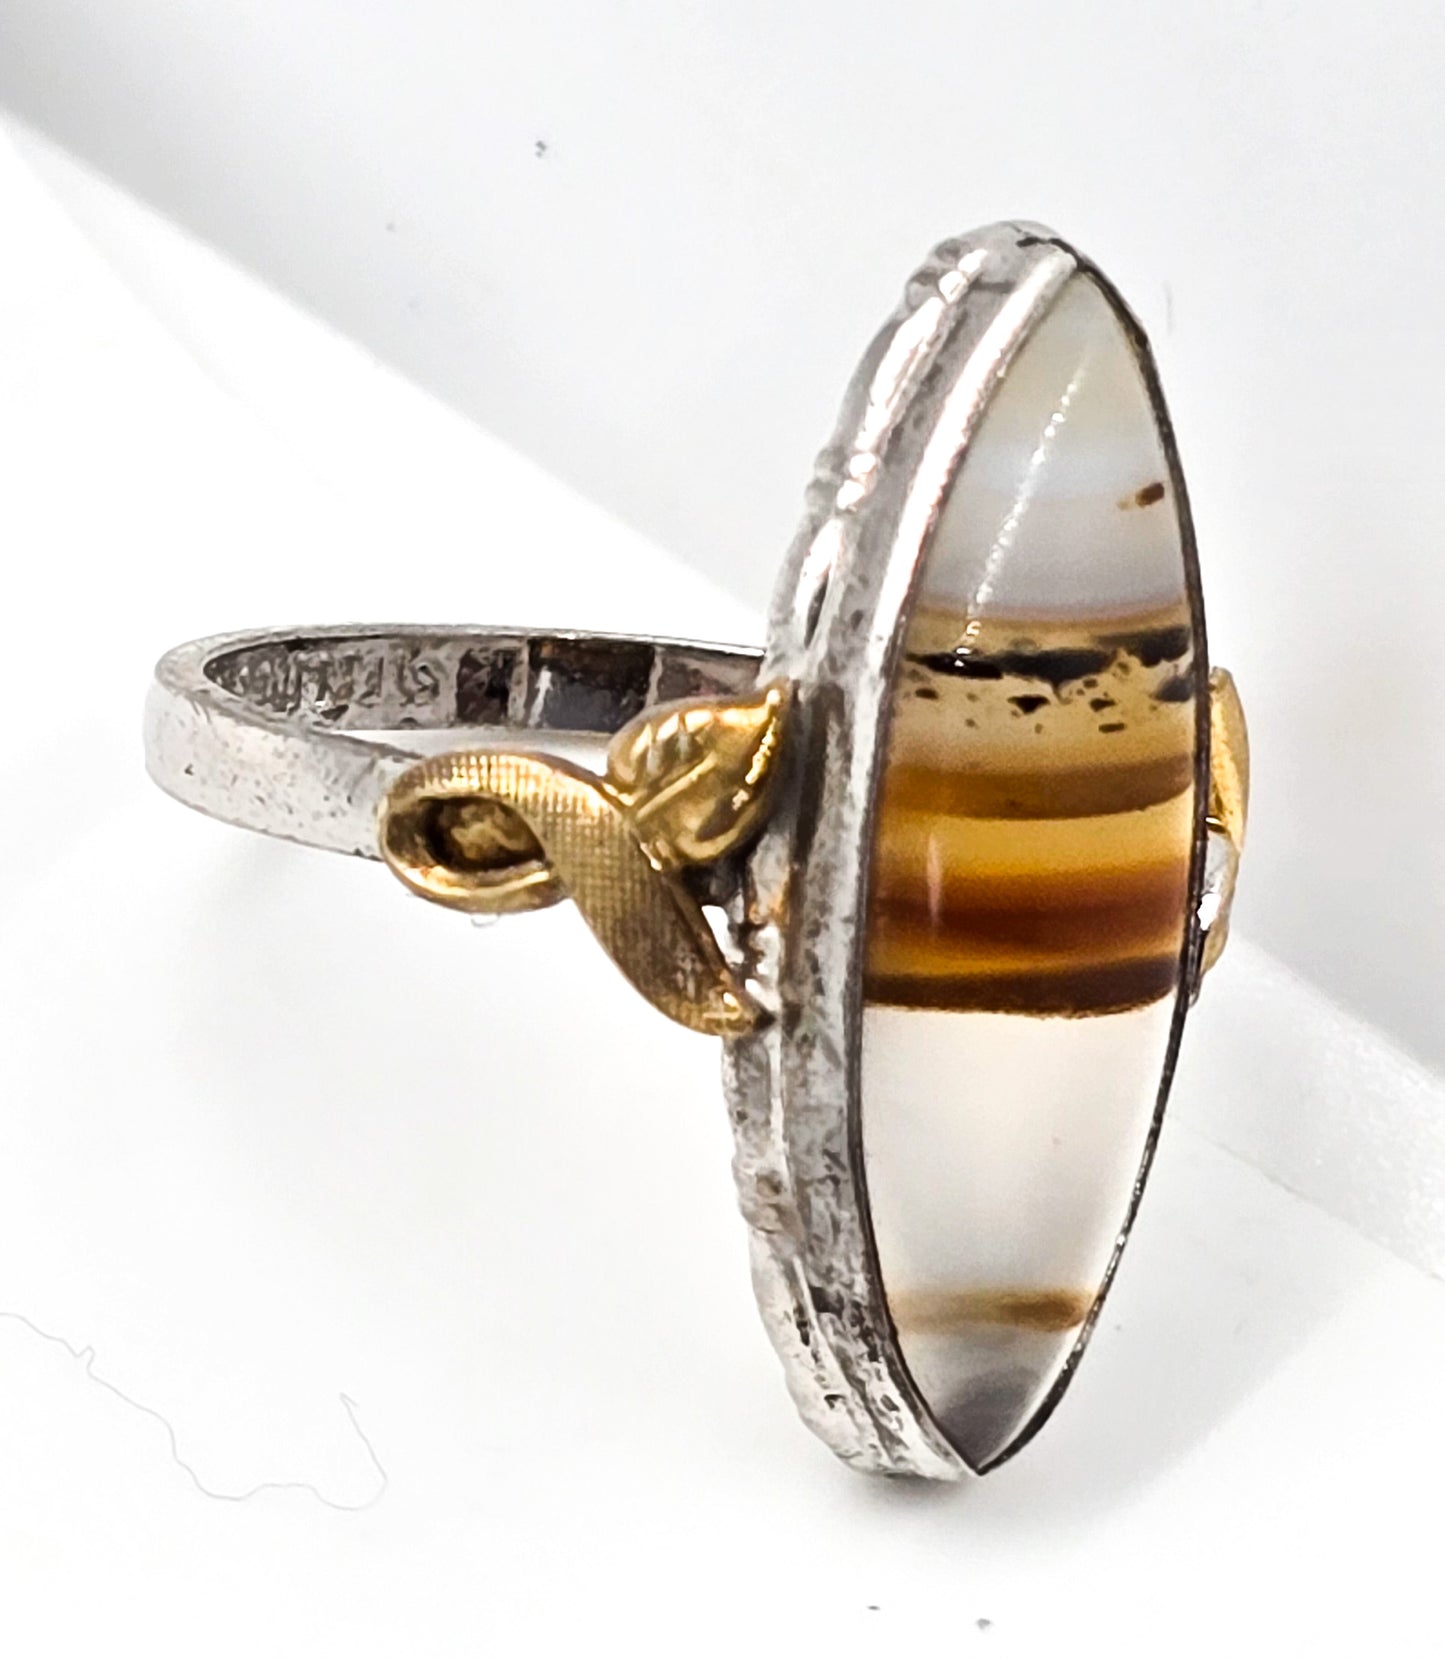 Clark and Coombs Art Deco dendritic Agate antique sterling silver 10k gold filled ring size 7